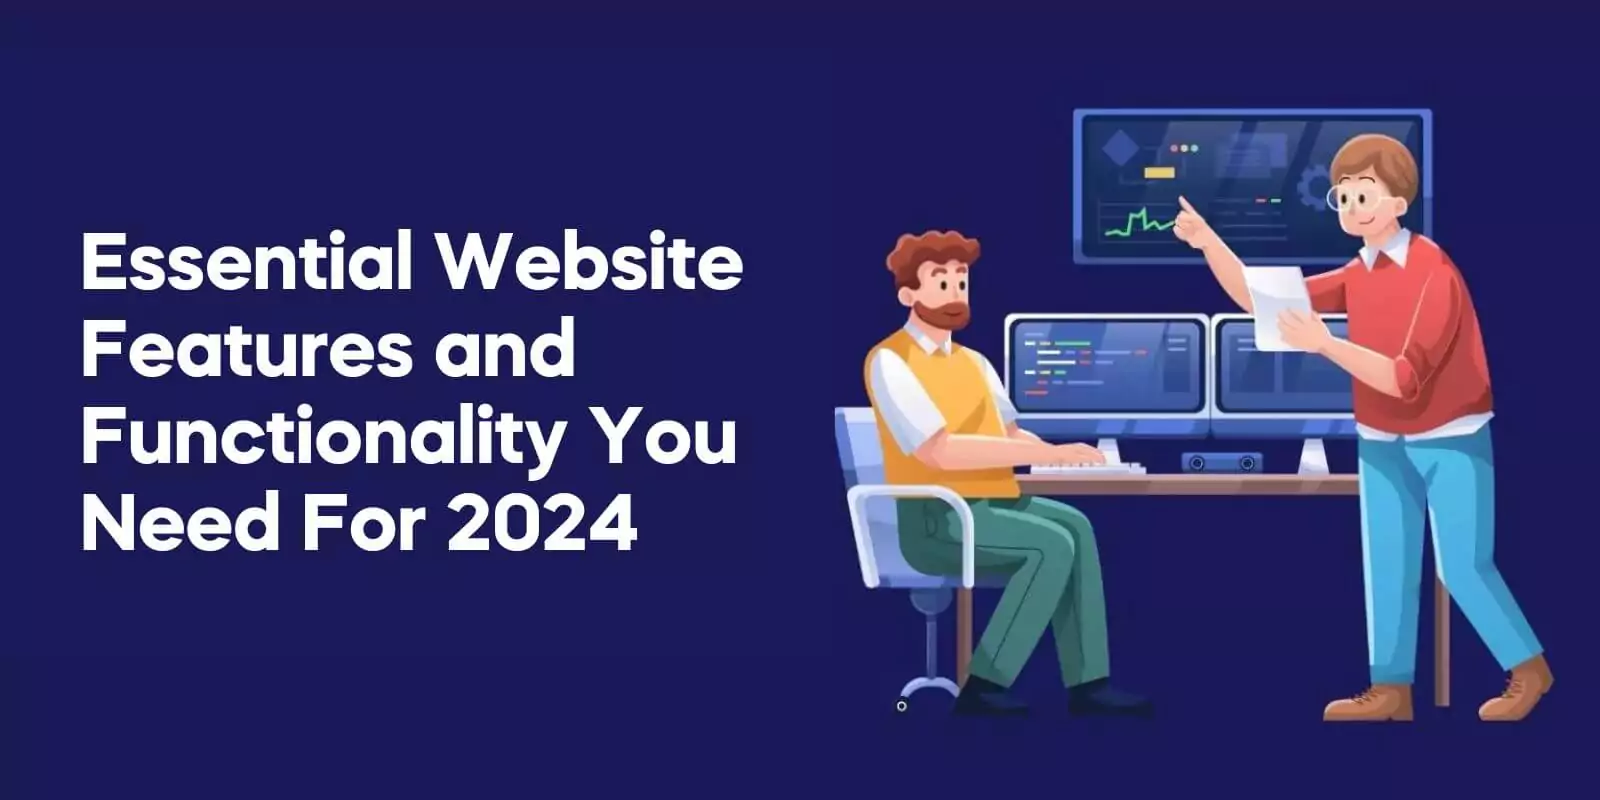 Essential Website Features and Functionality You Need for 2024